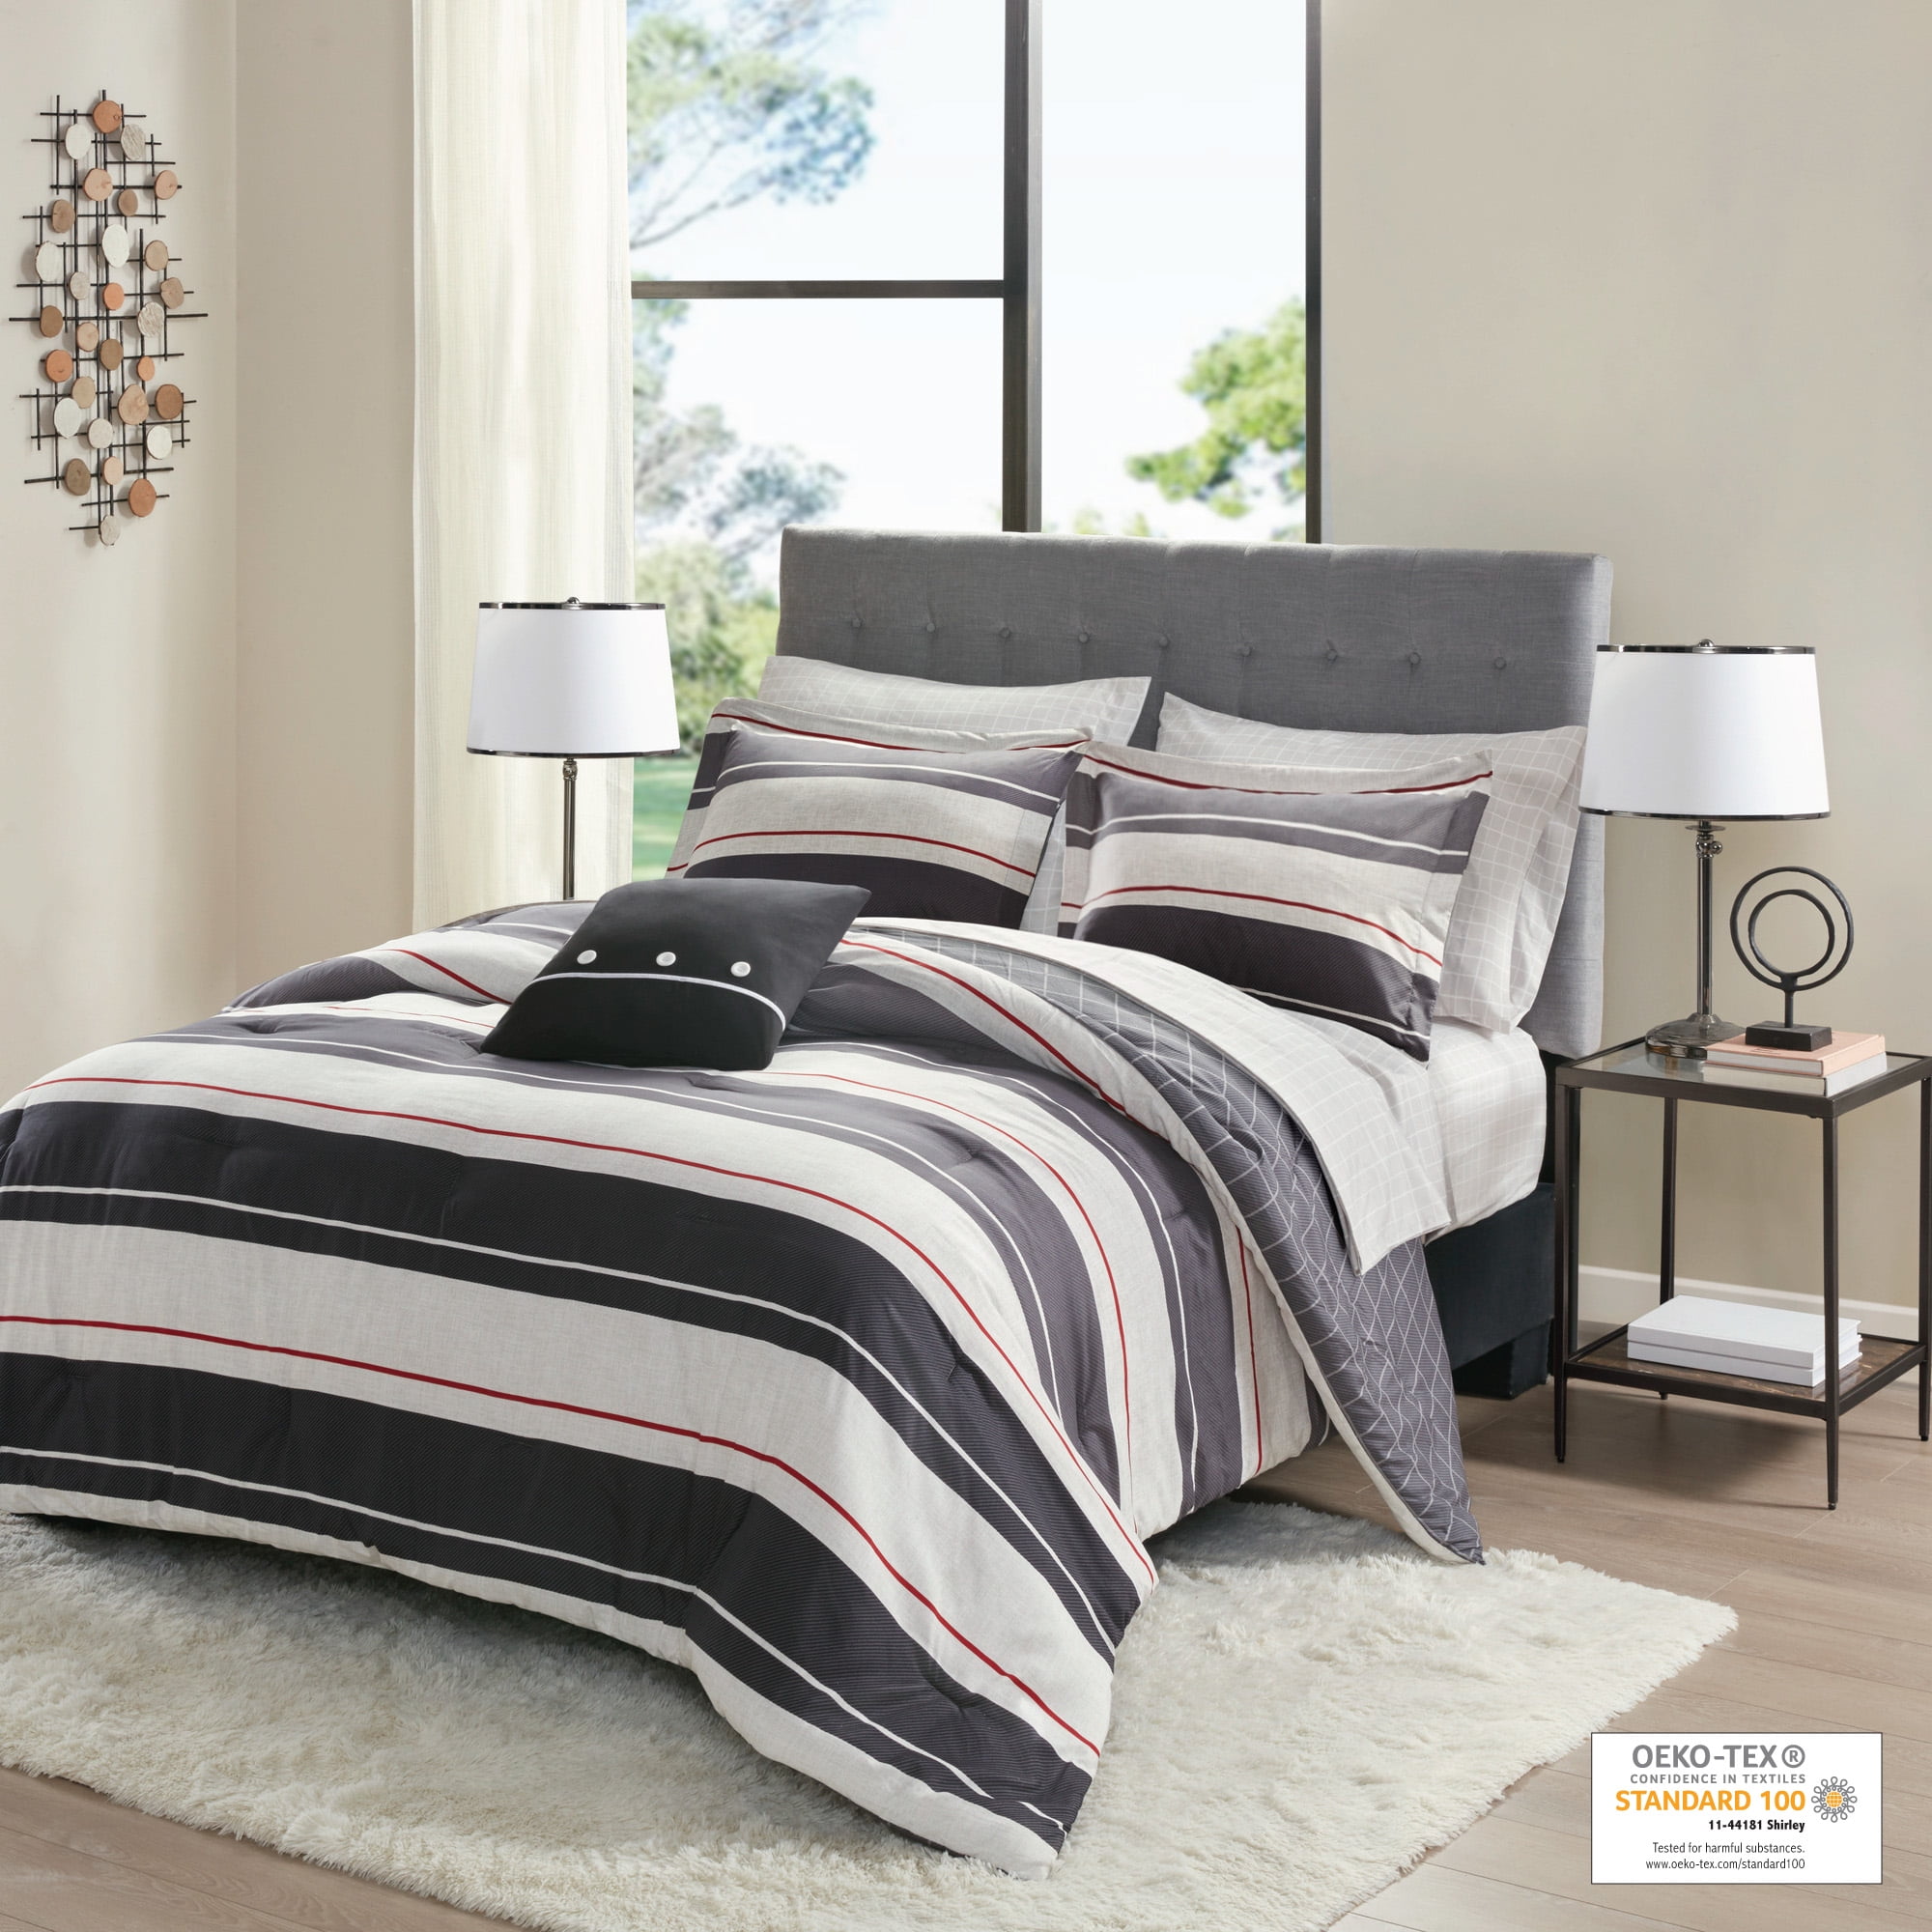 Utopia Bedding Flat Sheets - Pack of 6 - Soft Brushed Microfiber